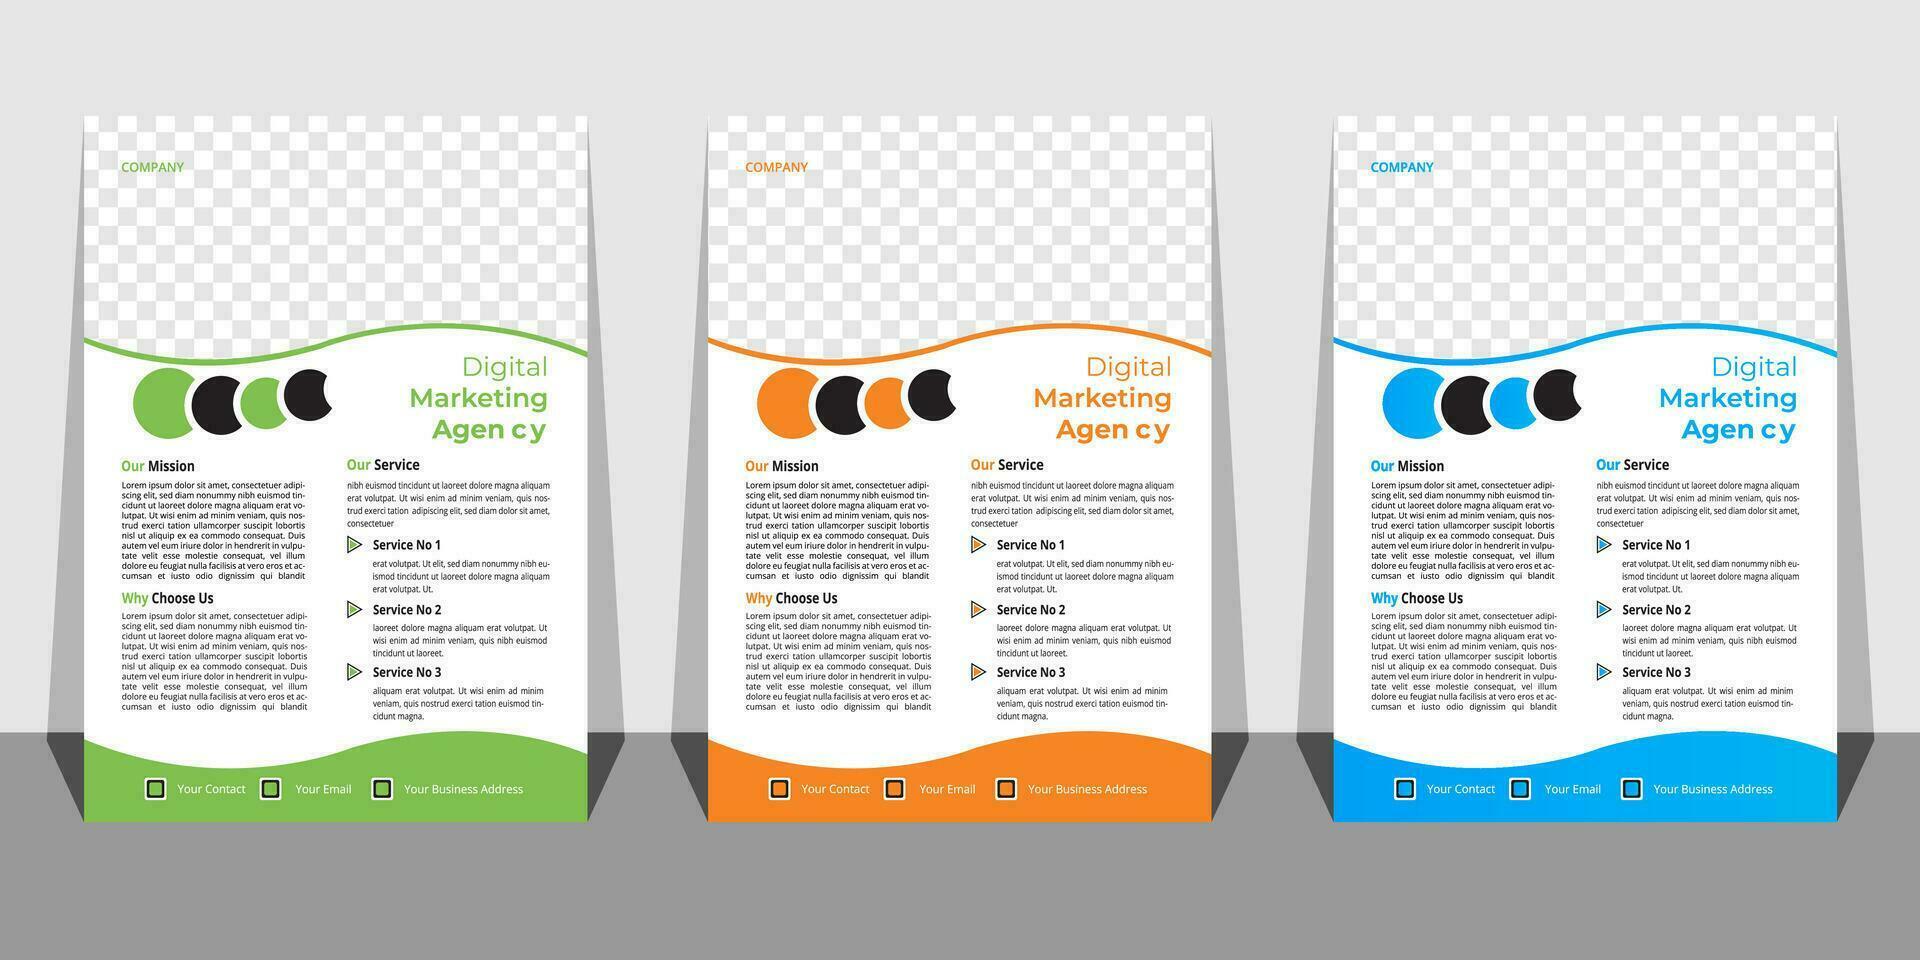 Business Flyer Template with Mockup Free Vector